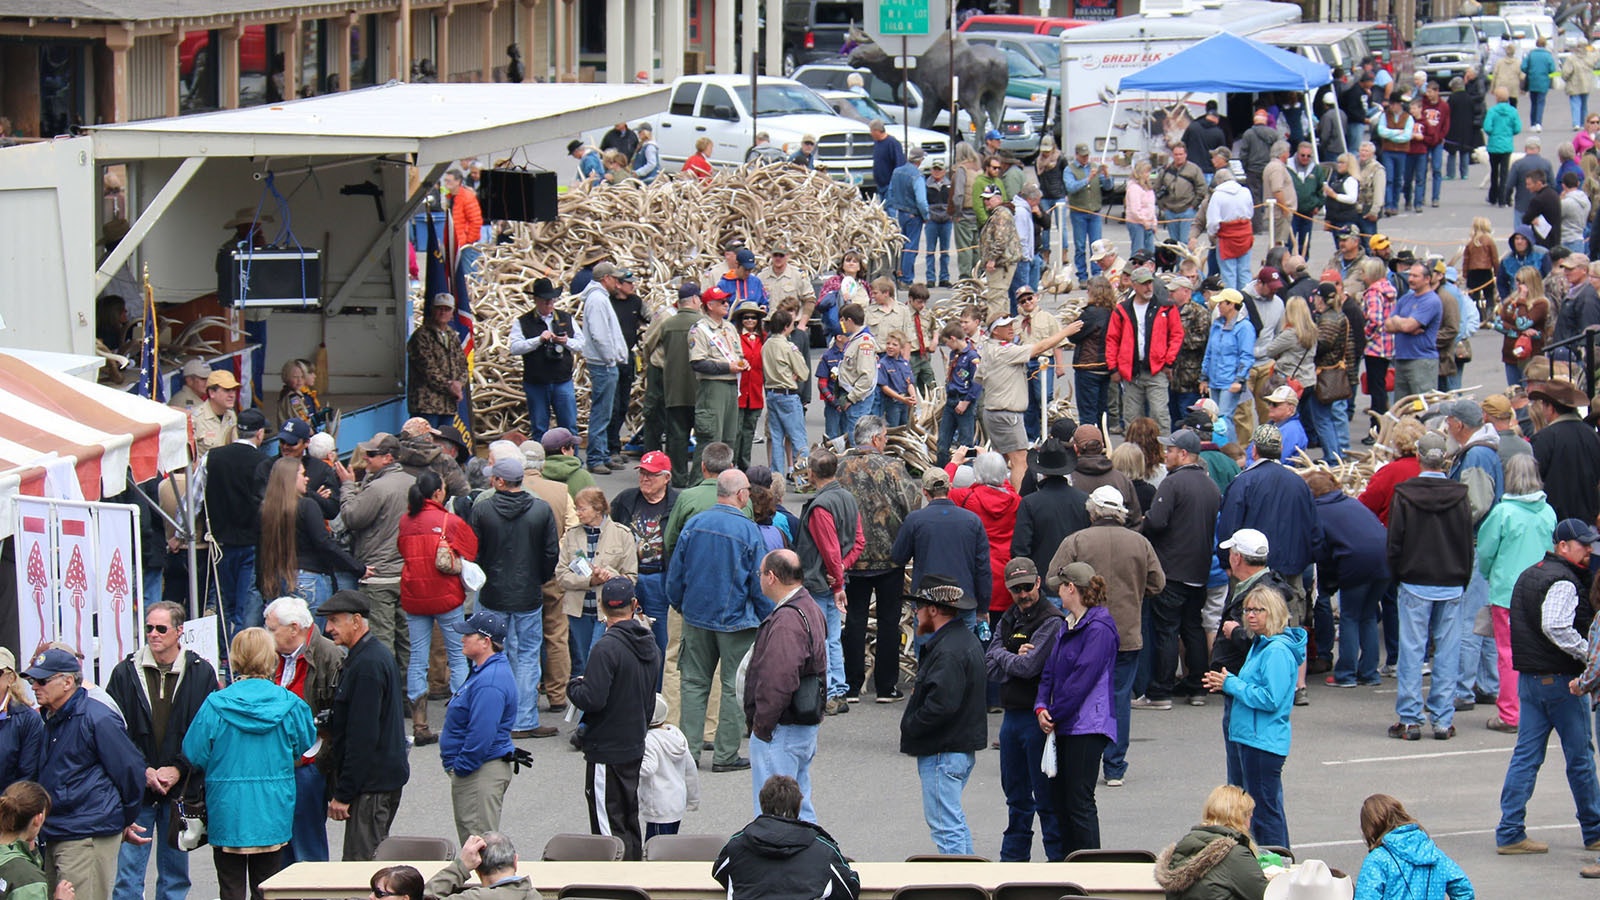 The annual ElkFest antler auction always draws big crowds and hundreds of bidders to Jackson, Wyoming.